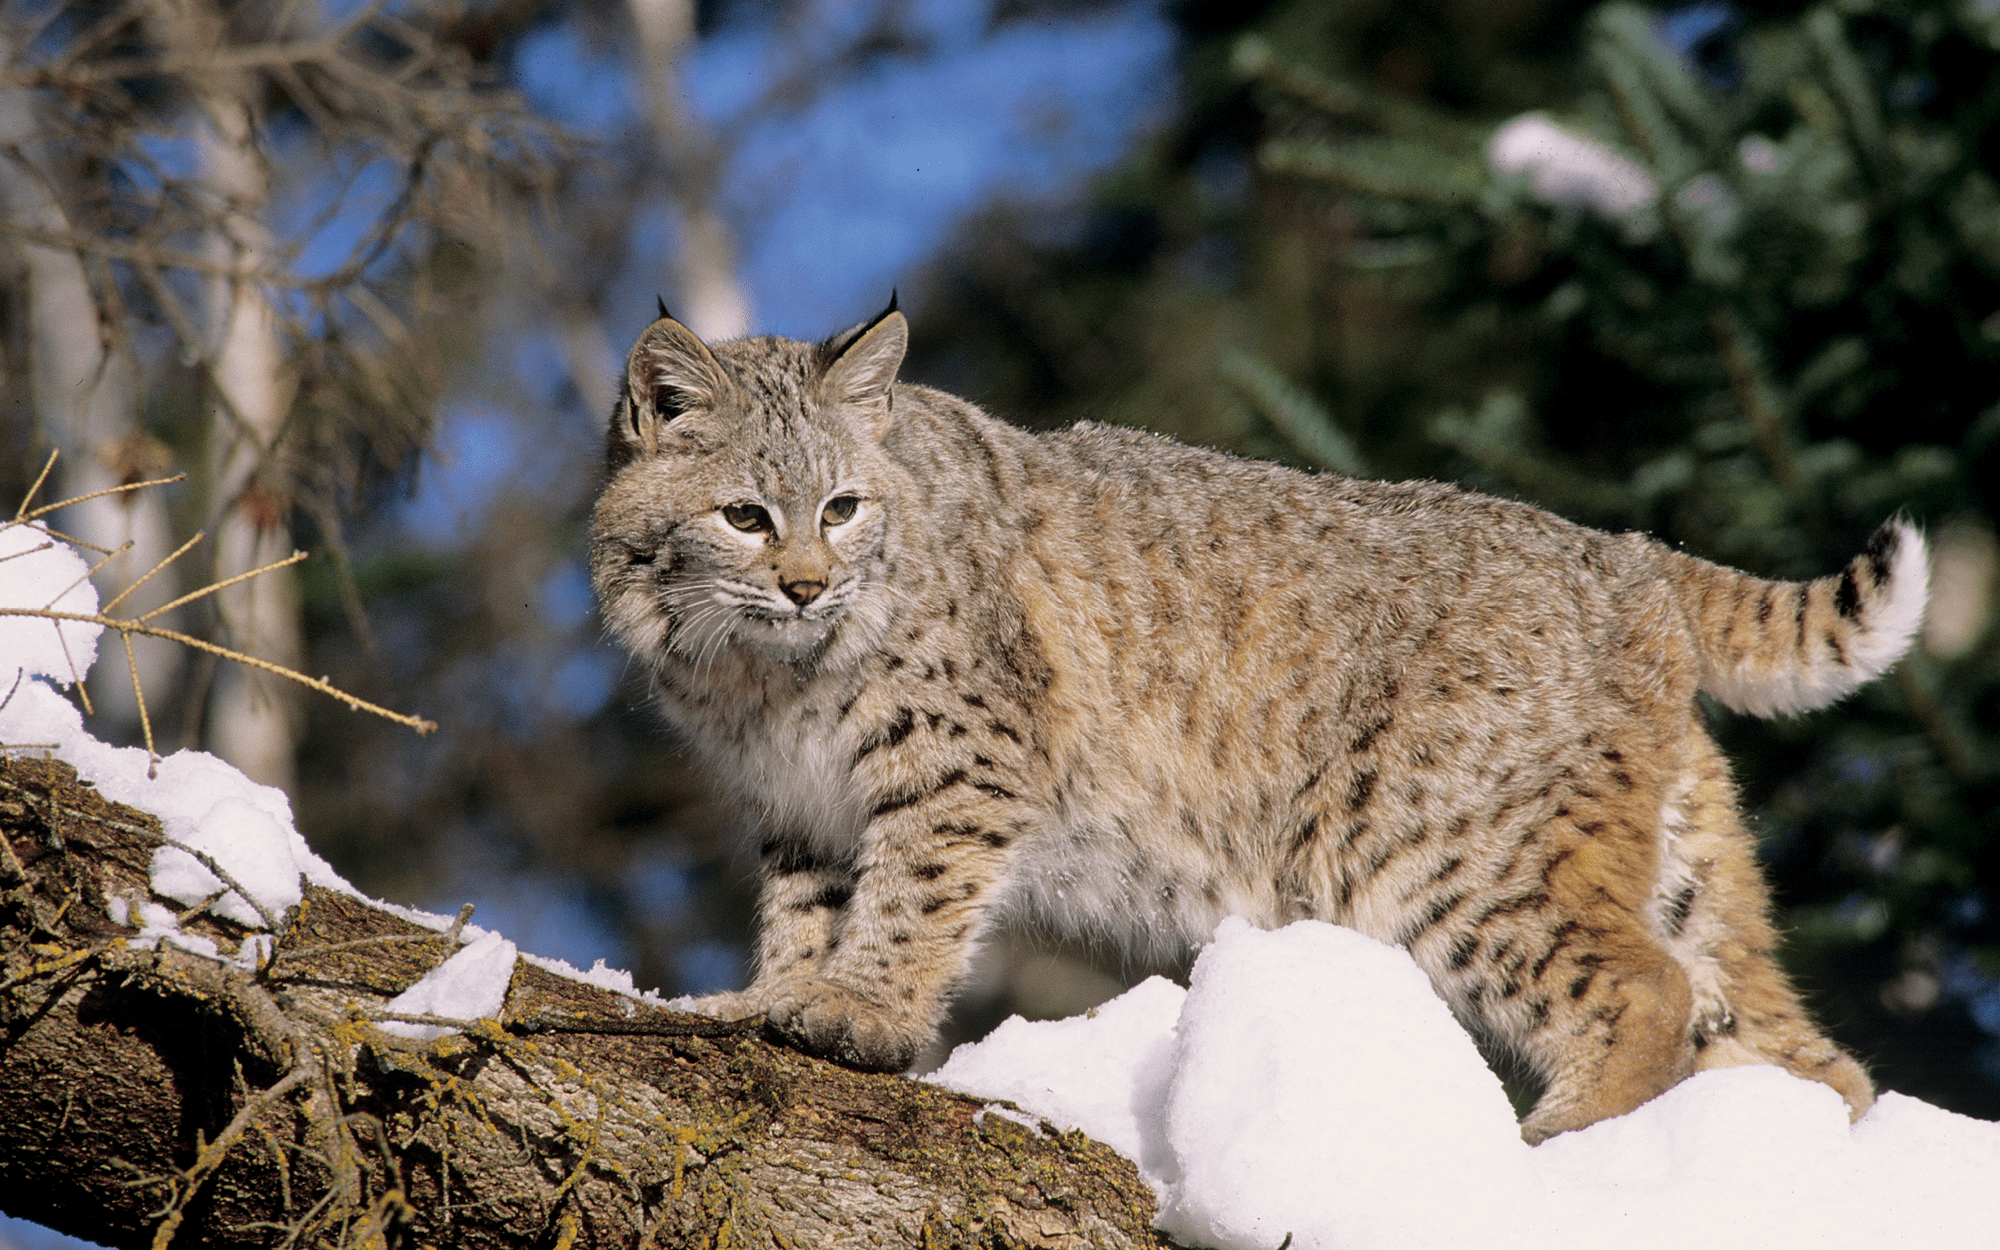 A bobcat perched on a log in the snow